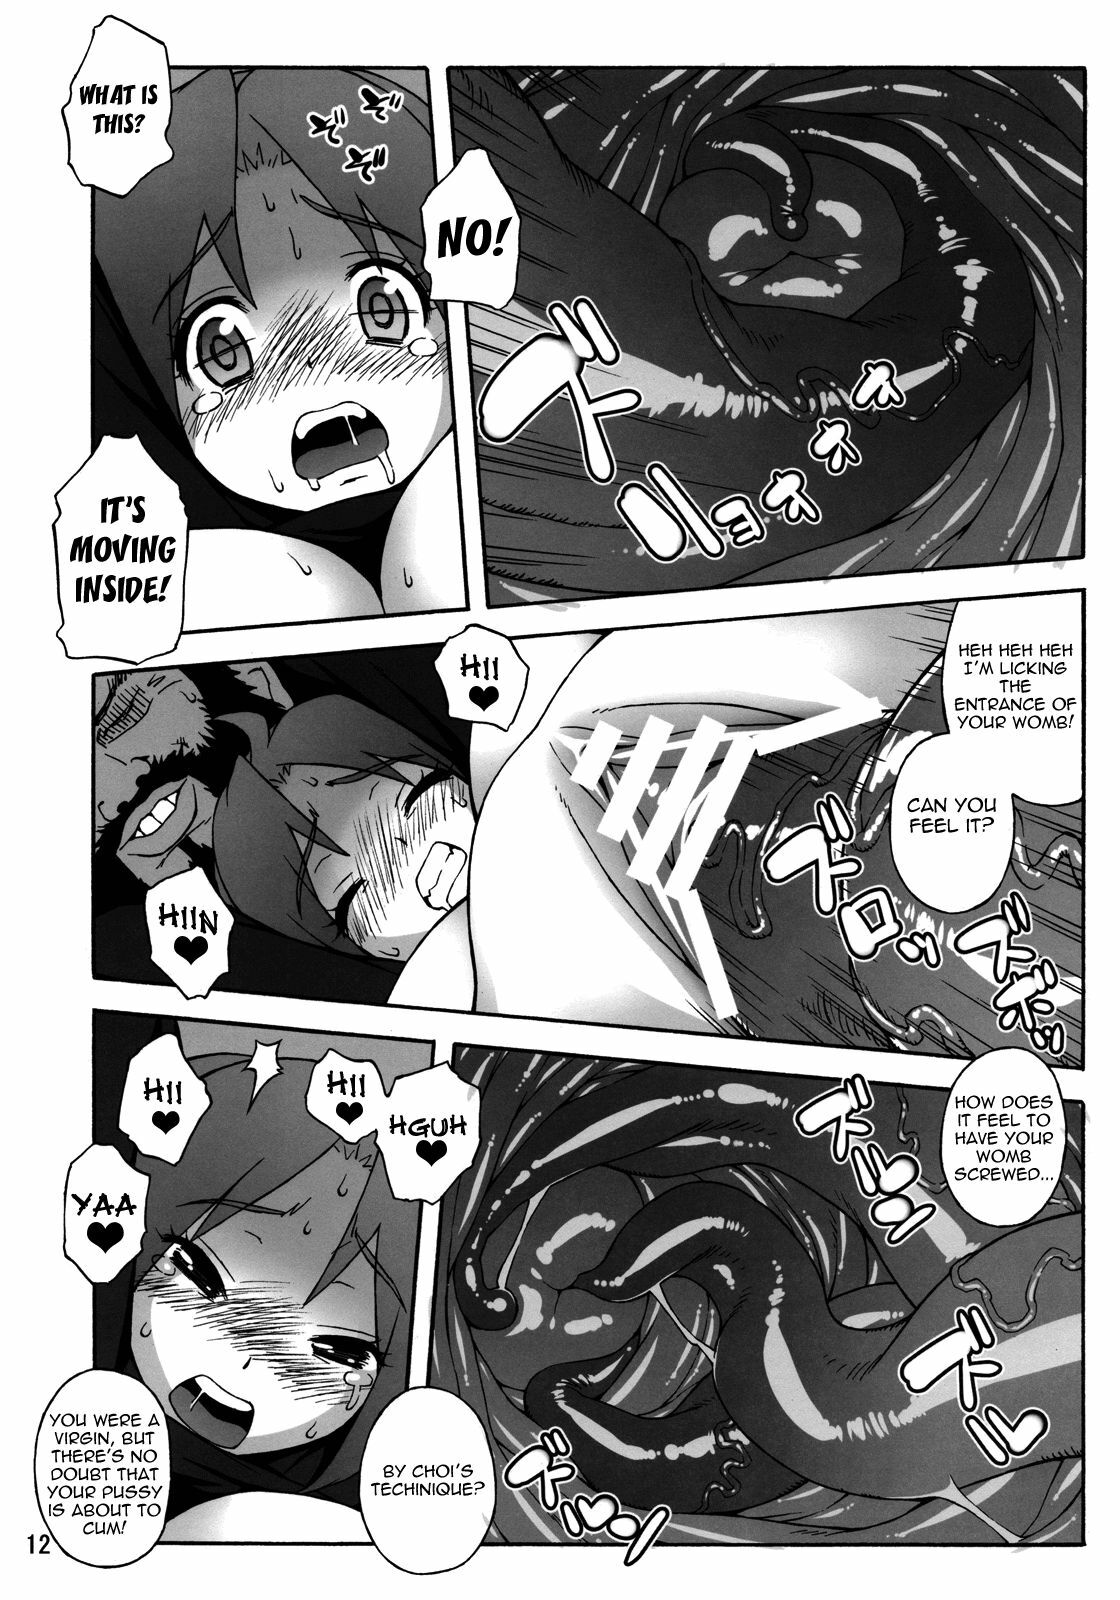 (C76) [666protect (Jingrock)] A.N.T.R. (King of Fighters) [English] [Yoroshii] page 11 full